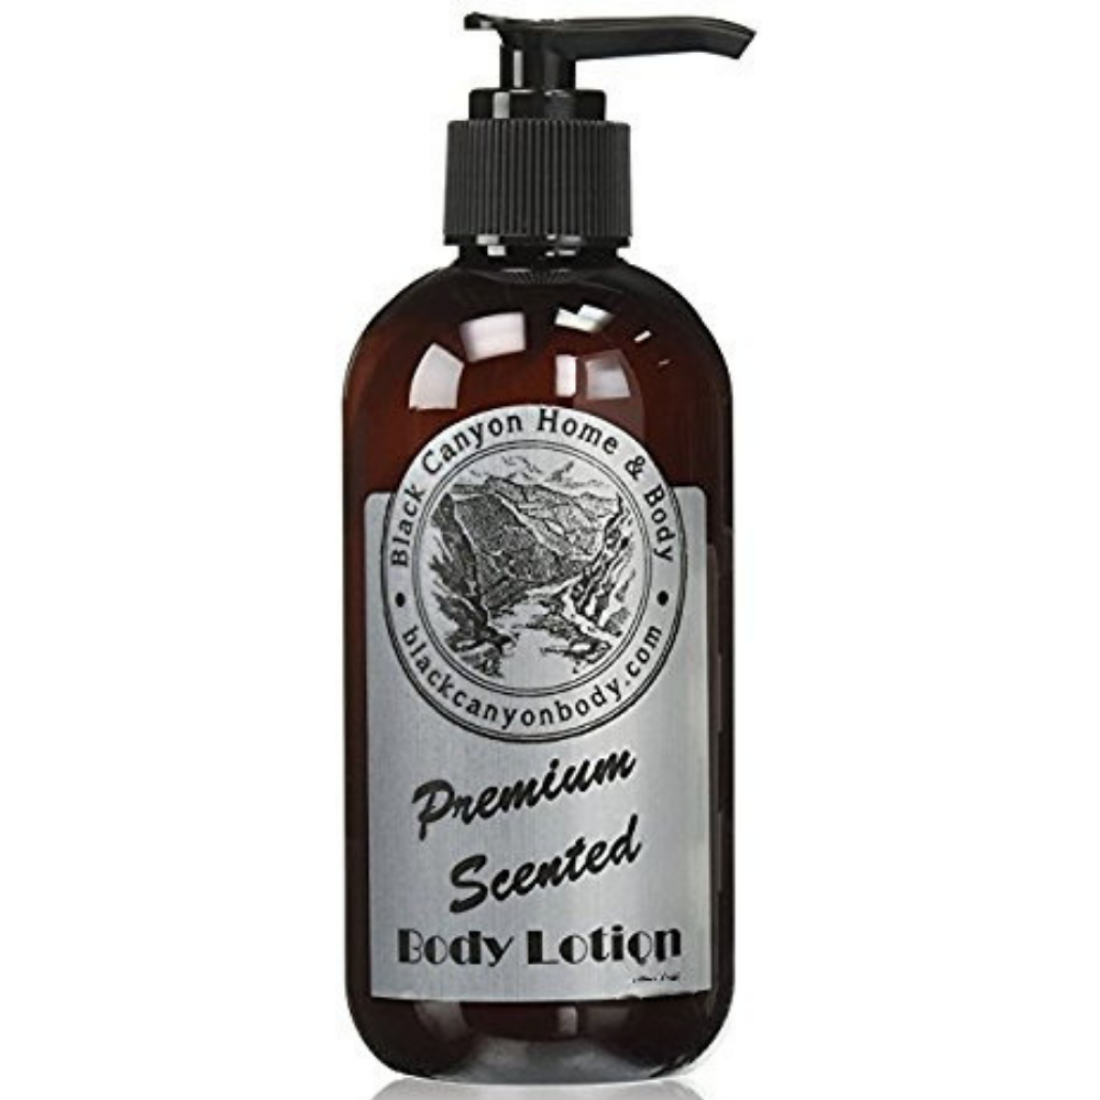 Black Canyon Berry Peach Scented Luxury Body Lotion with Lanolin and Jojoba Oil